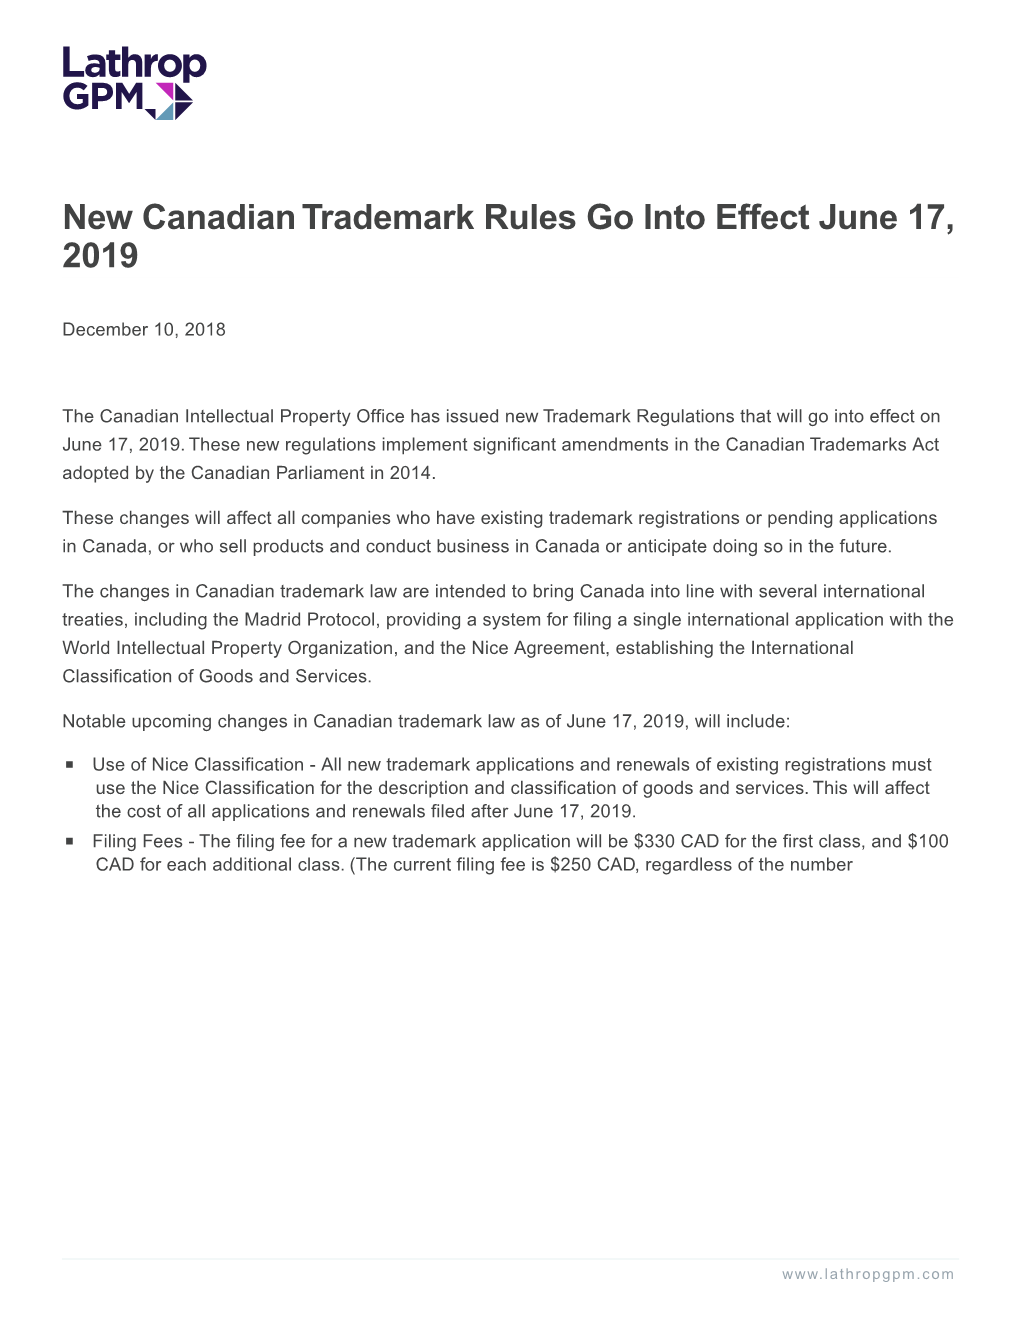 New Canadian Trademark Rules Go Into Effect June 17, 2019